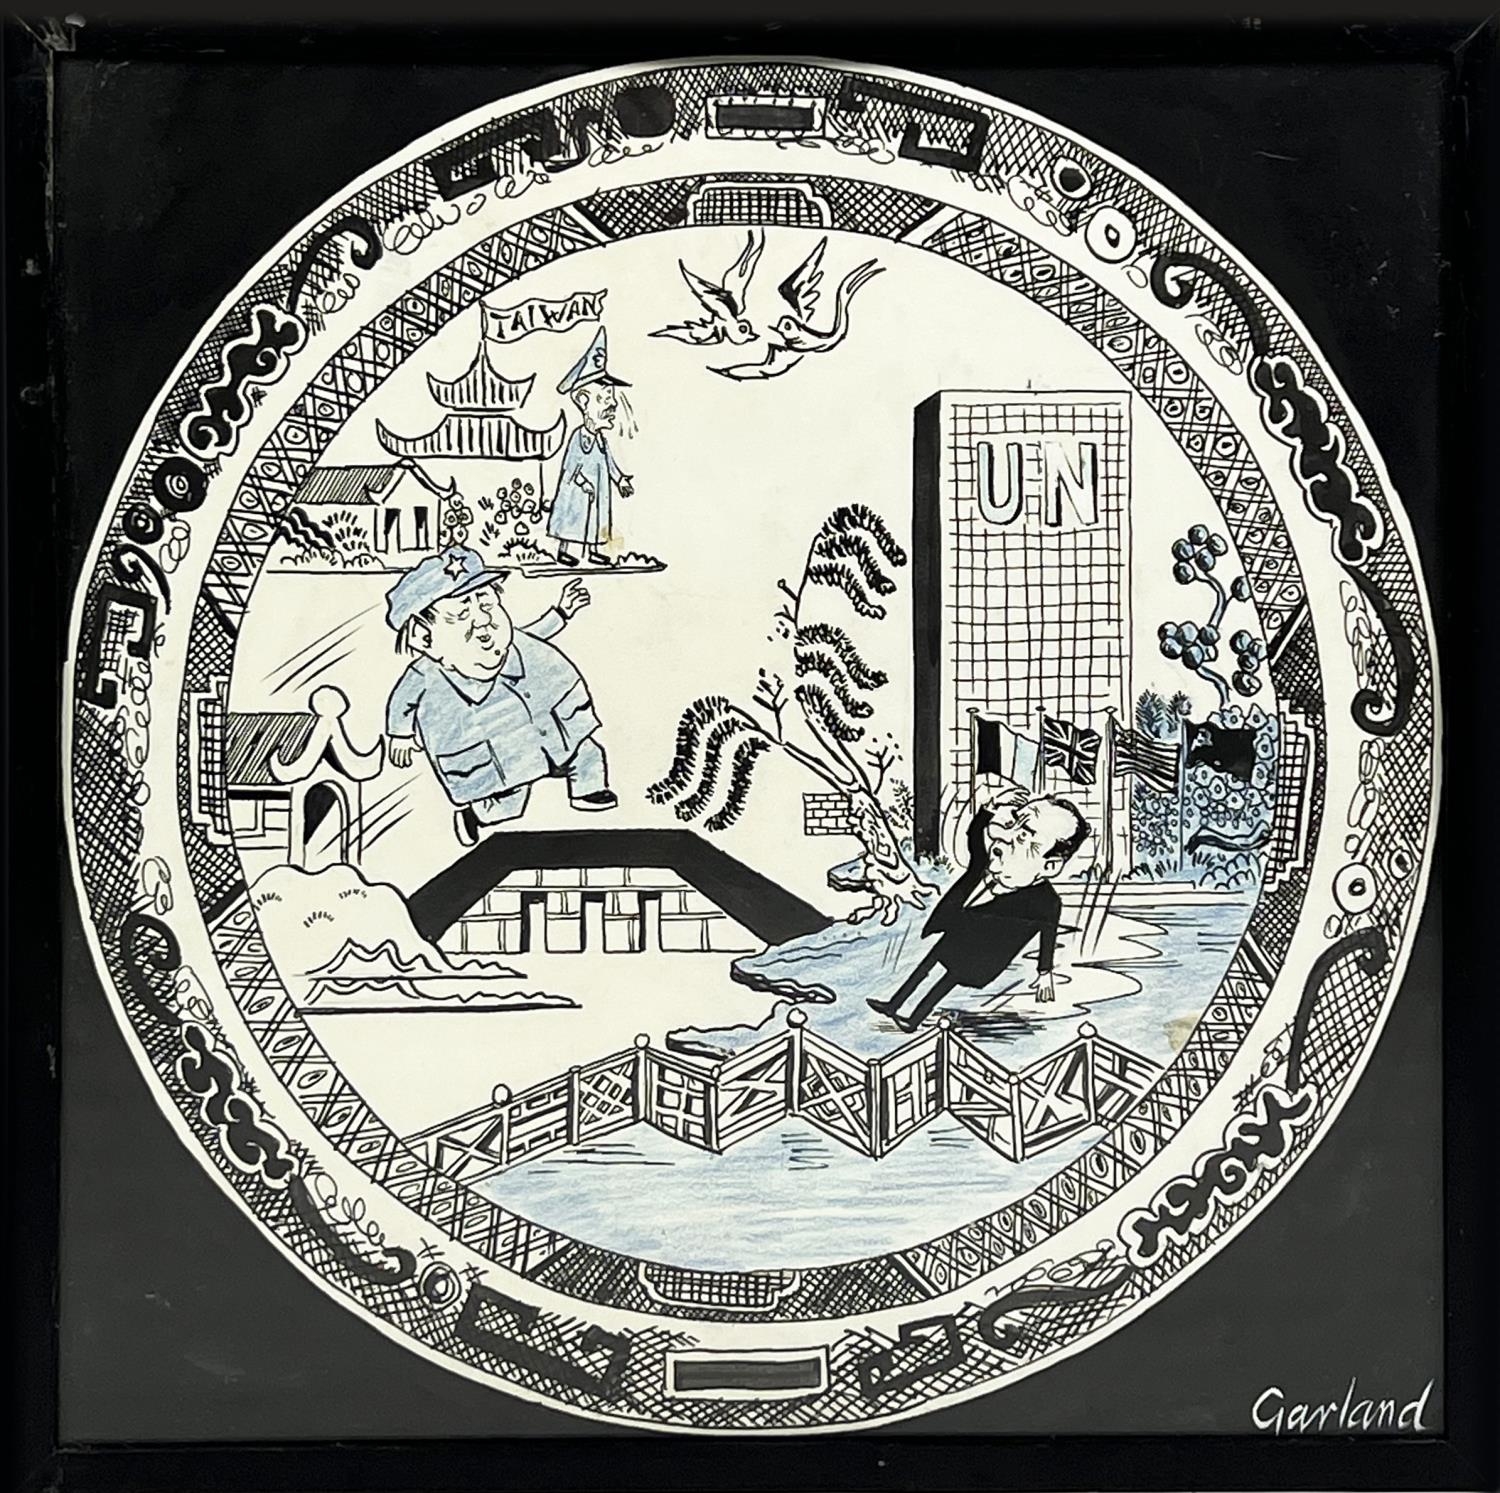 NICHOLAS GARLAND (b. 1935) 'Nixon, Mao Zedong and Zhou Enlai depicted on a willow pattern plate',